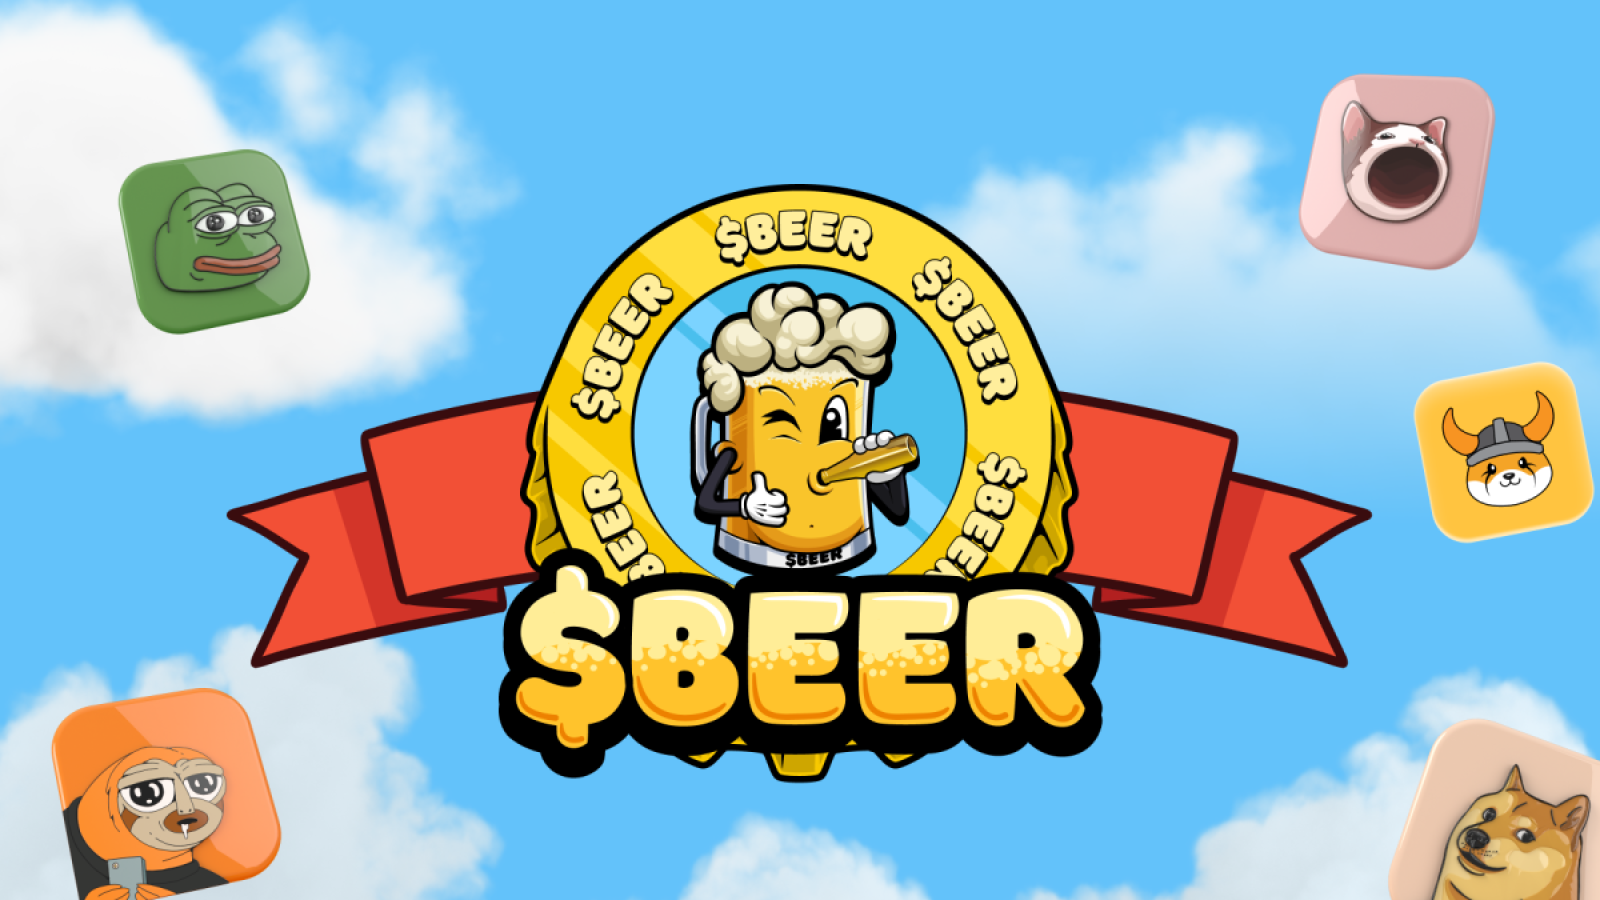 $BEER, a New Solana-Based Memecoin Completes Pre-Sale of 30,000 SOL This Week